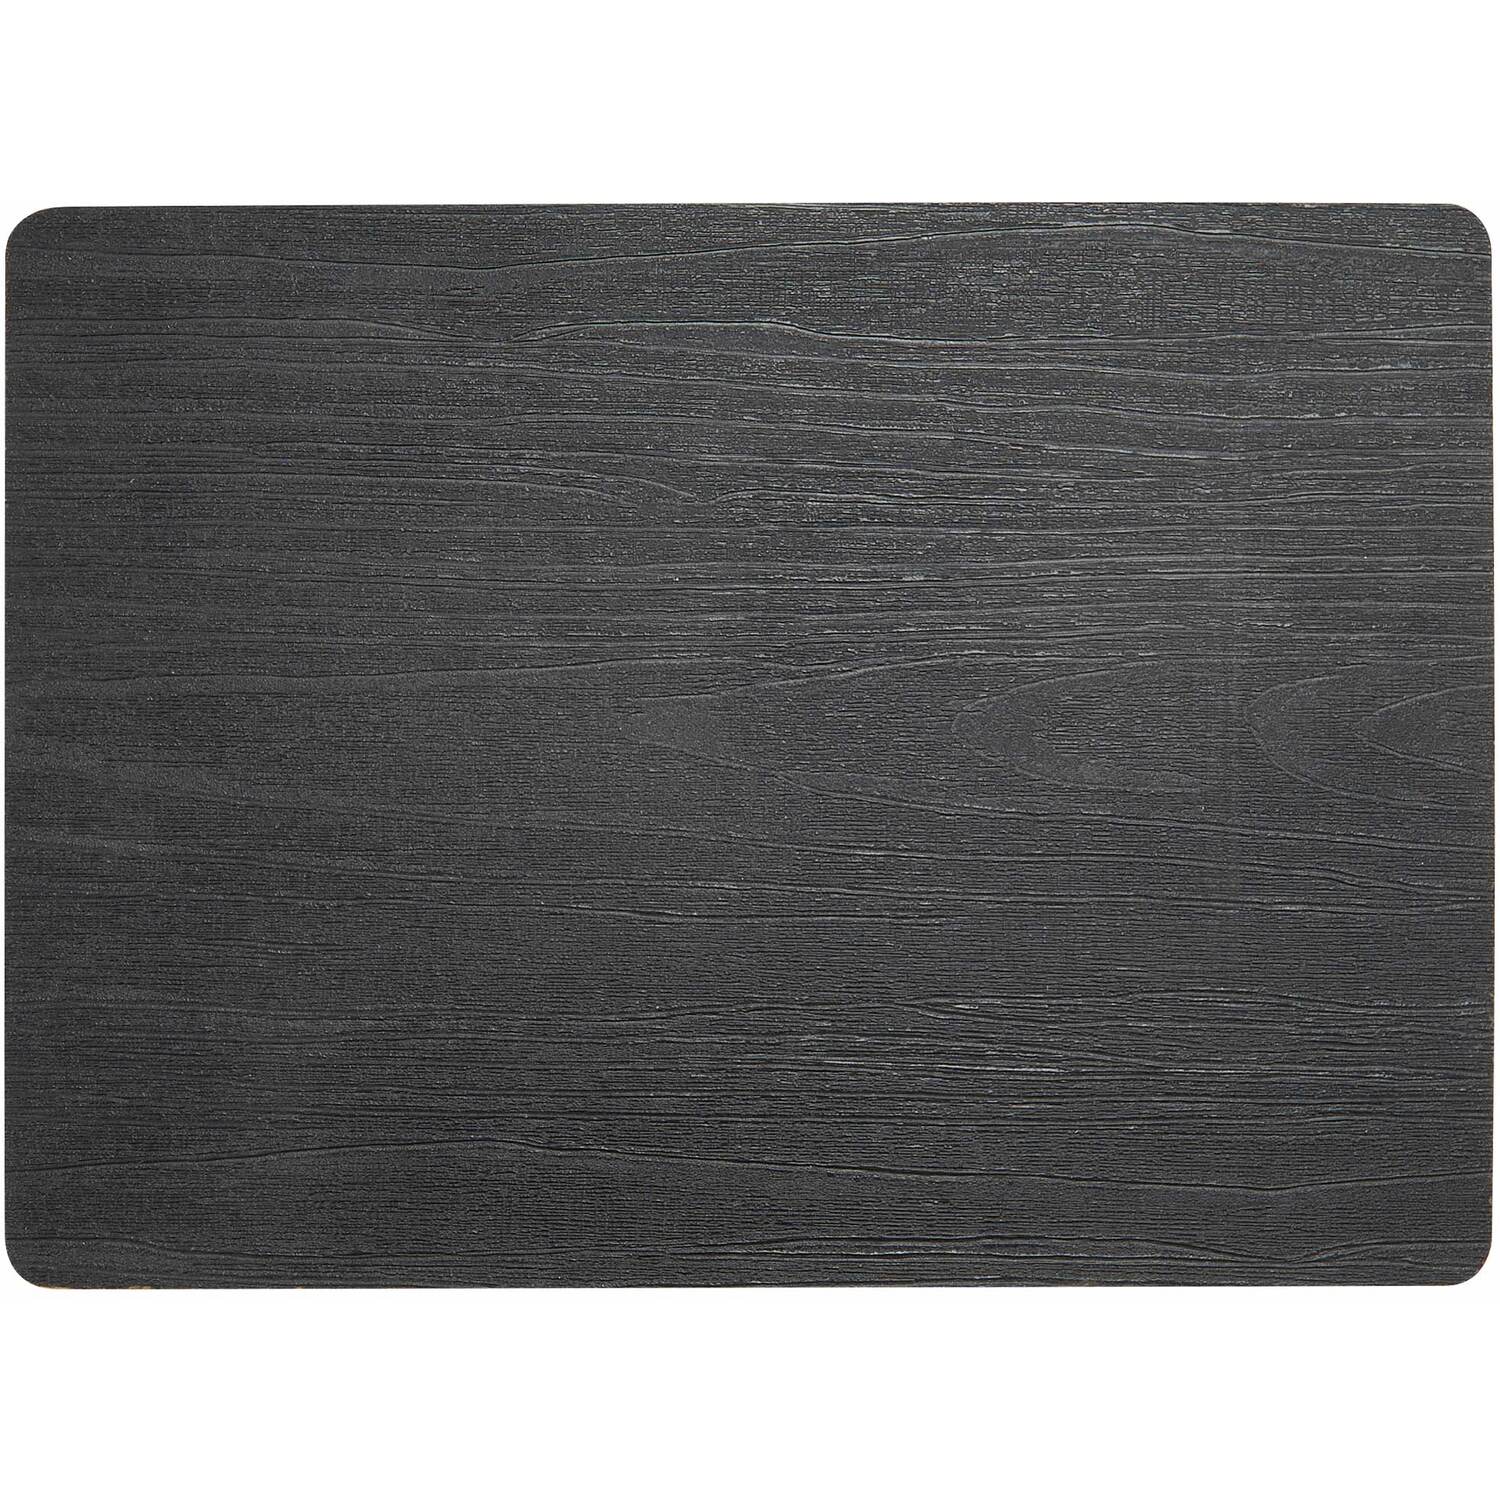 Pack of 2 Malmo Wood Effect Placemats - Black Image 1